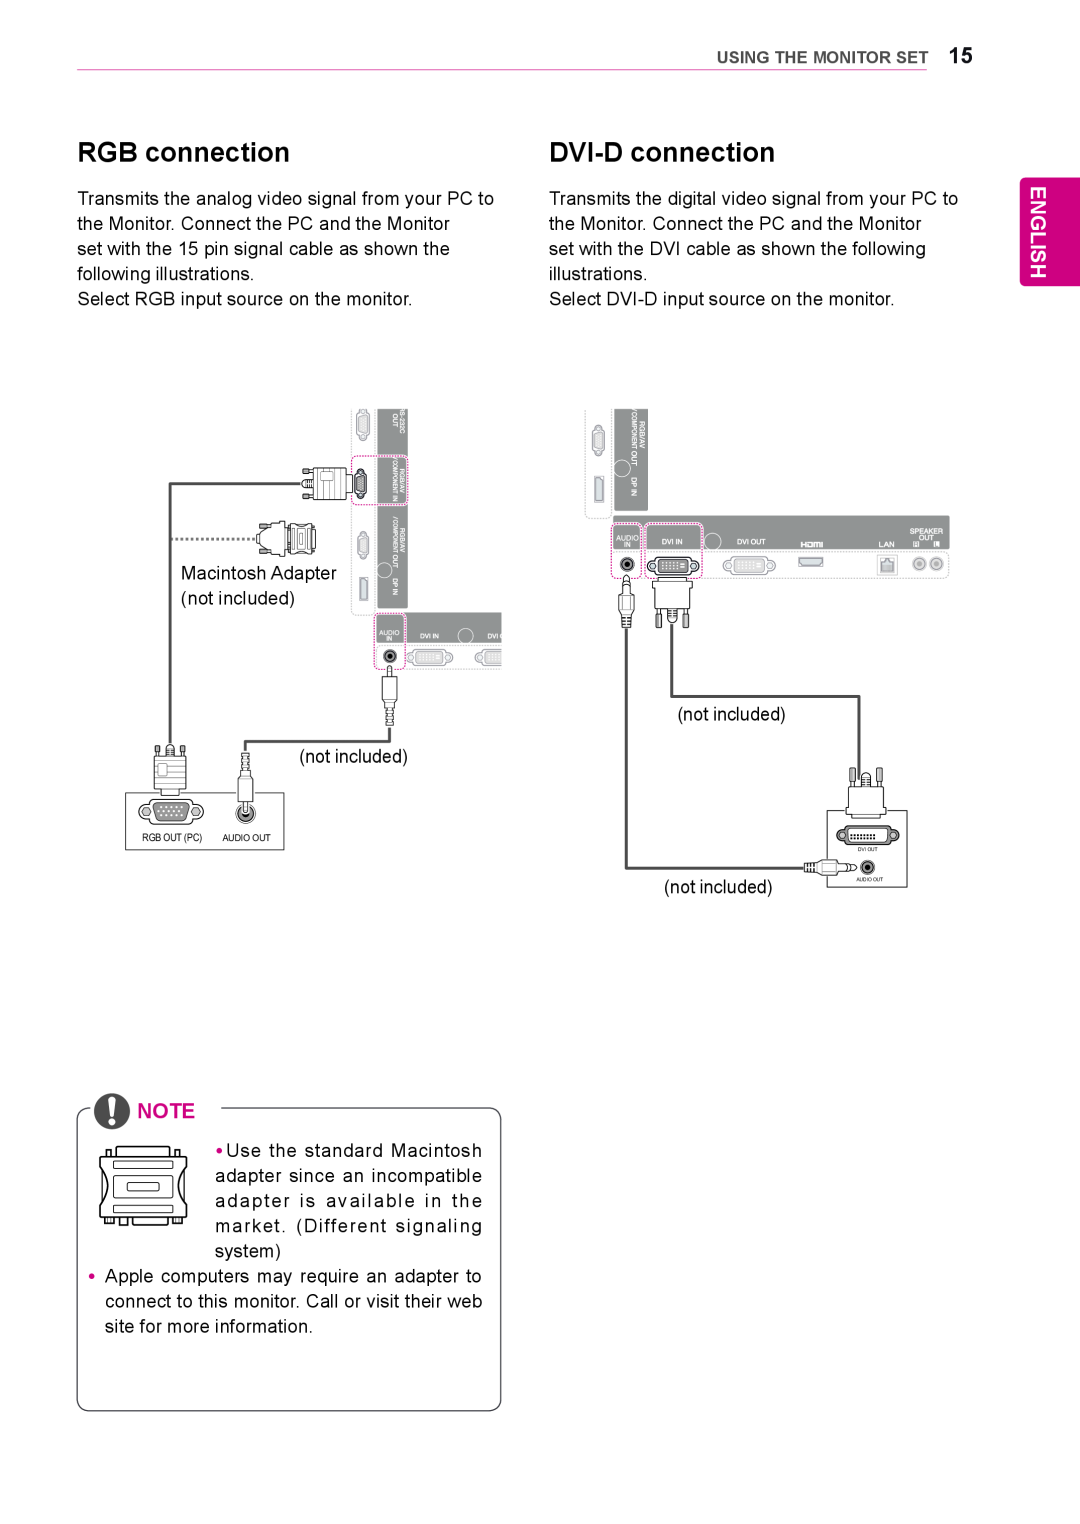 LG Electronics 42WS10, 47WS10, 55WS10 owner manual RGB connection, DVI-D connection, English, Using The Monitor Set 